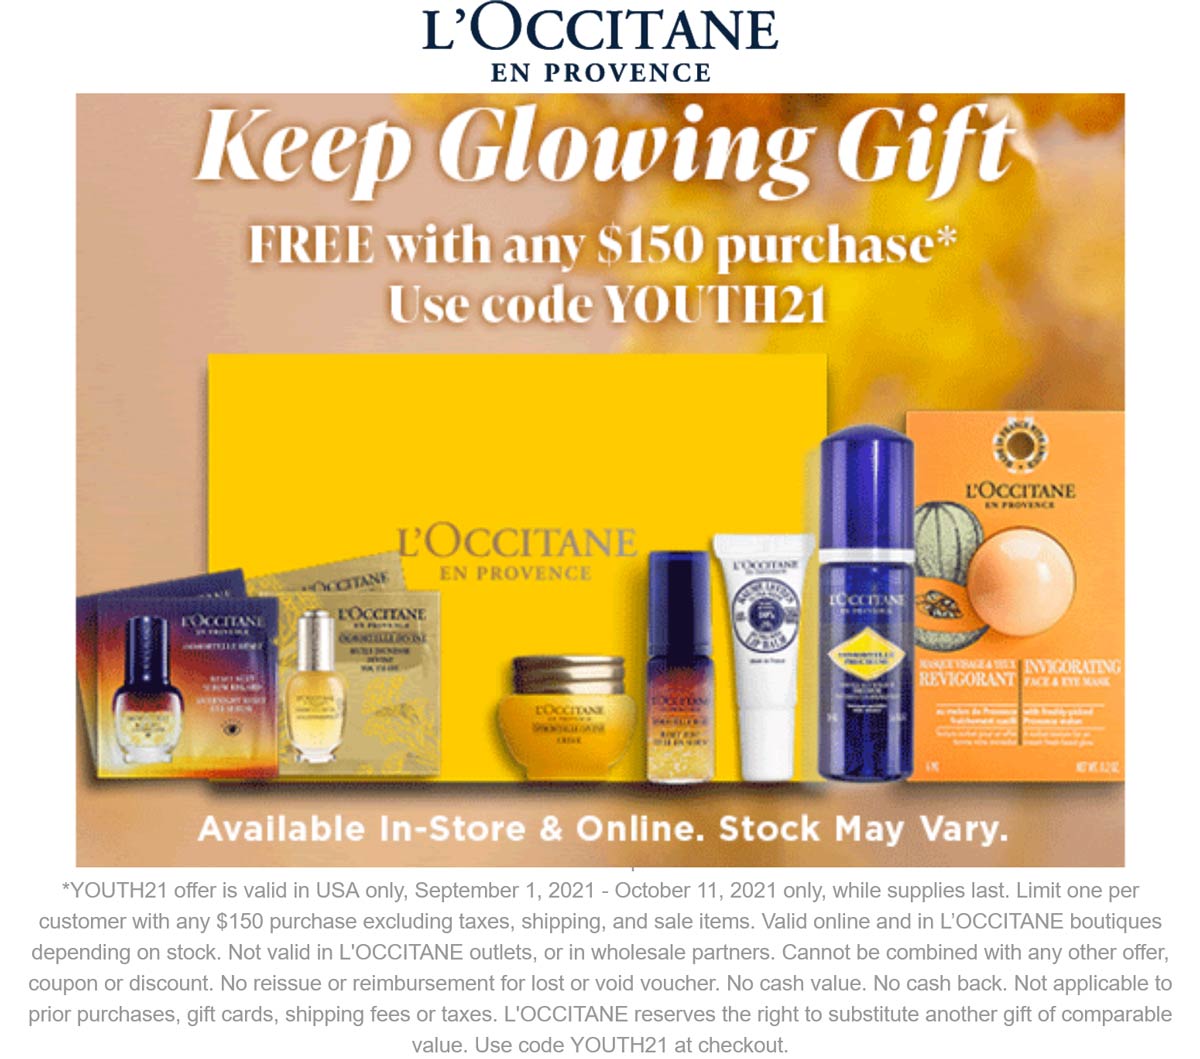 LOccitane en Provence stores Coupon  Free 9pc kit with $150 spent at LOccitane en Provence, or online via promo code YOUTH21 #loccitaneenprovence 